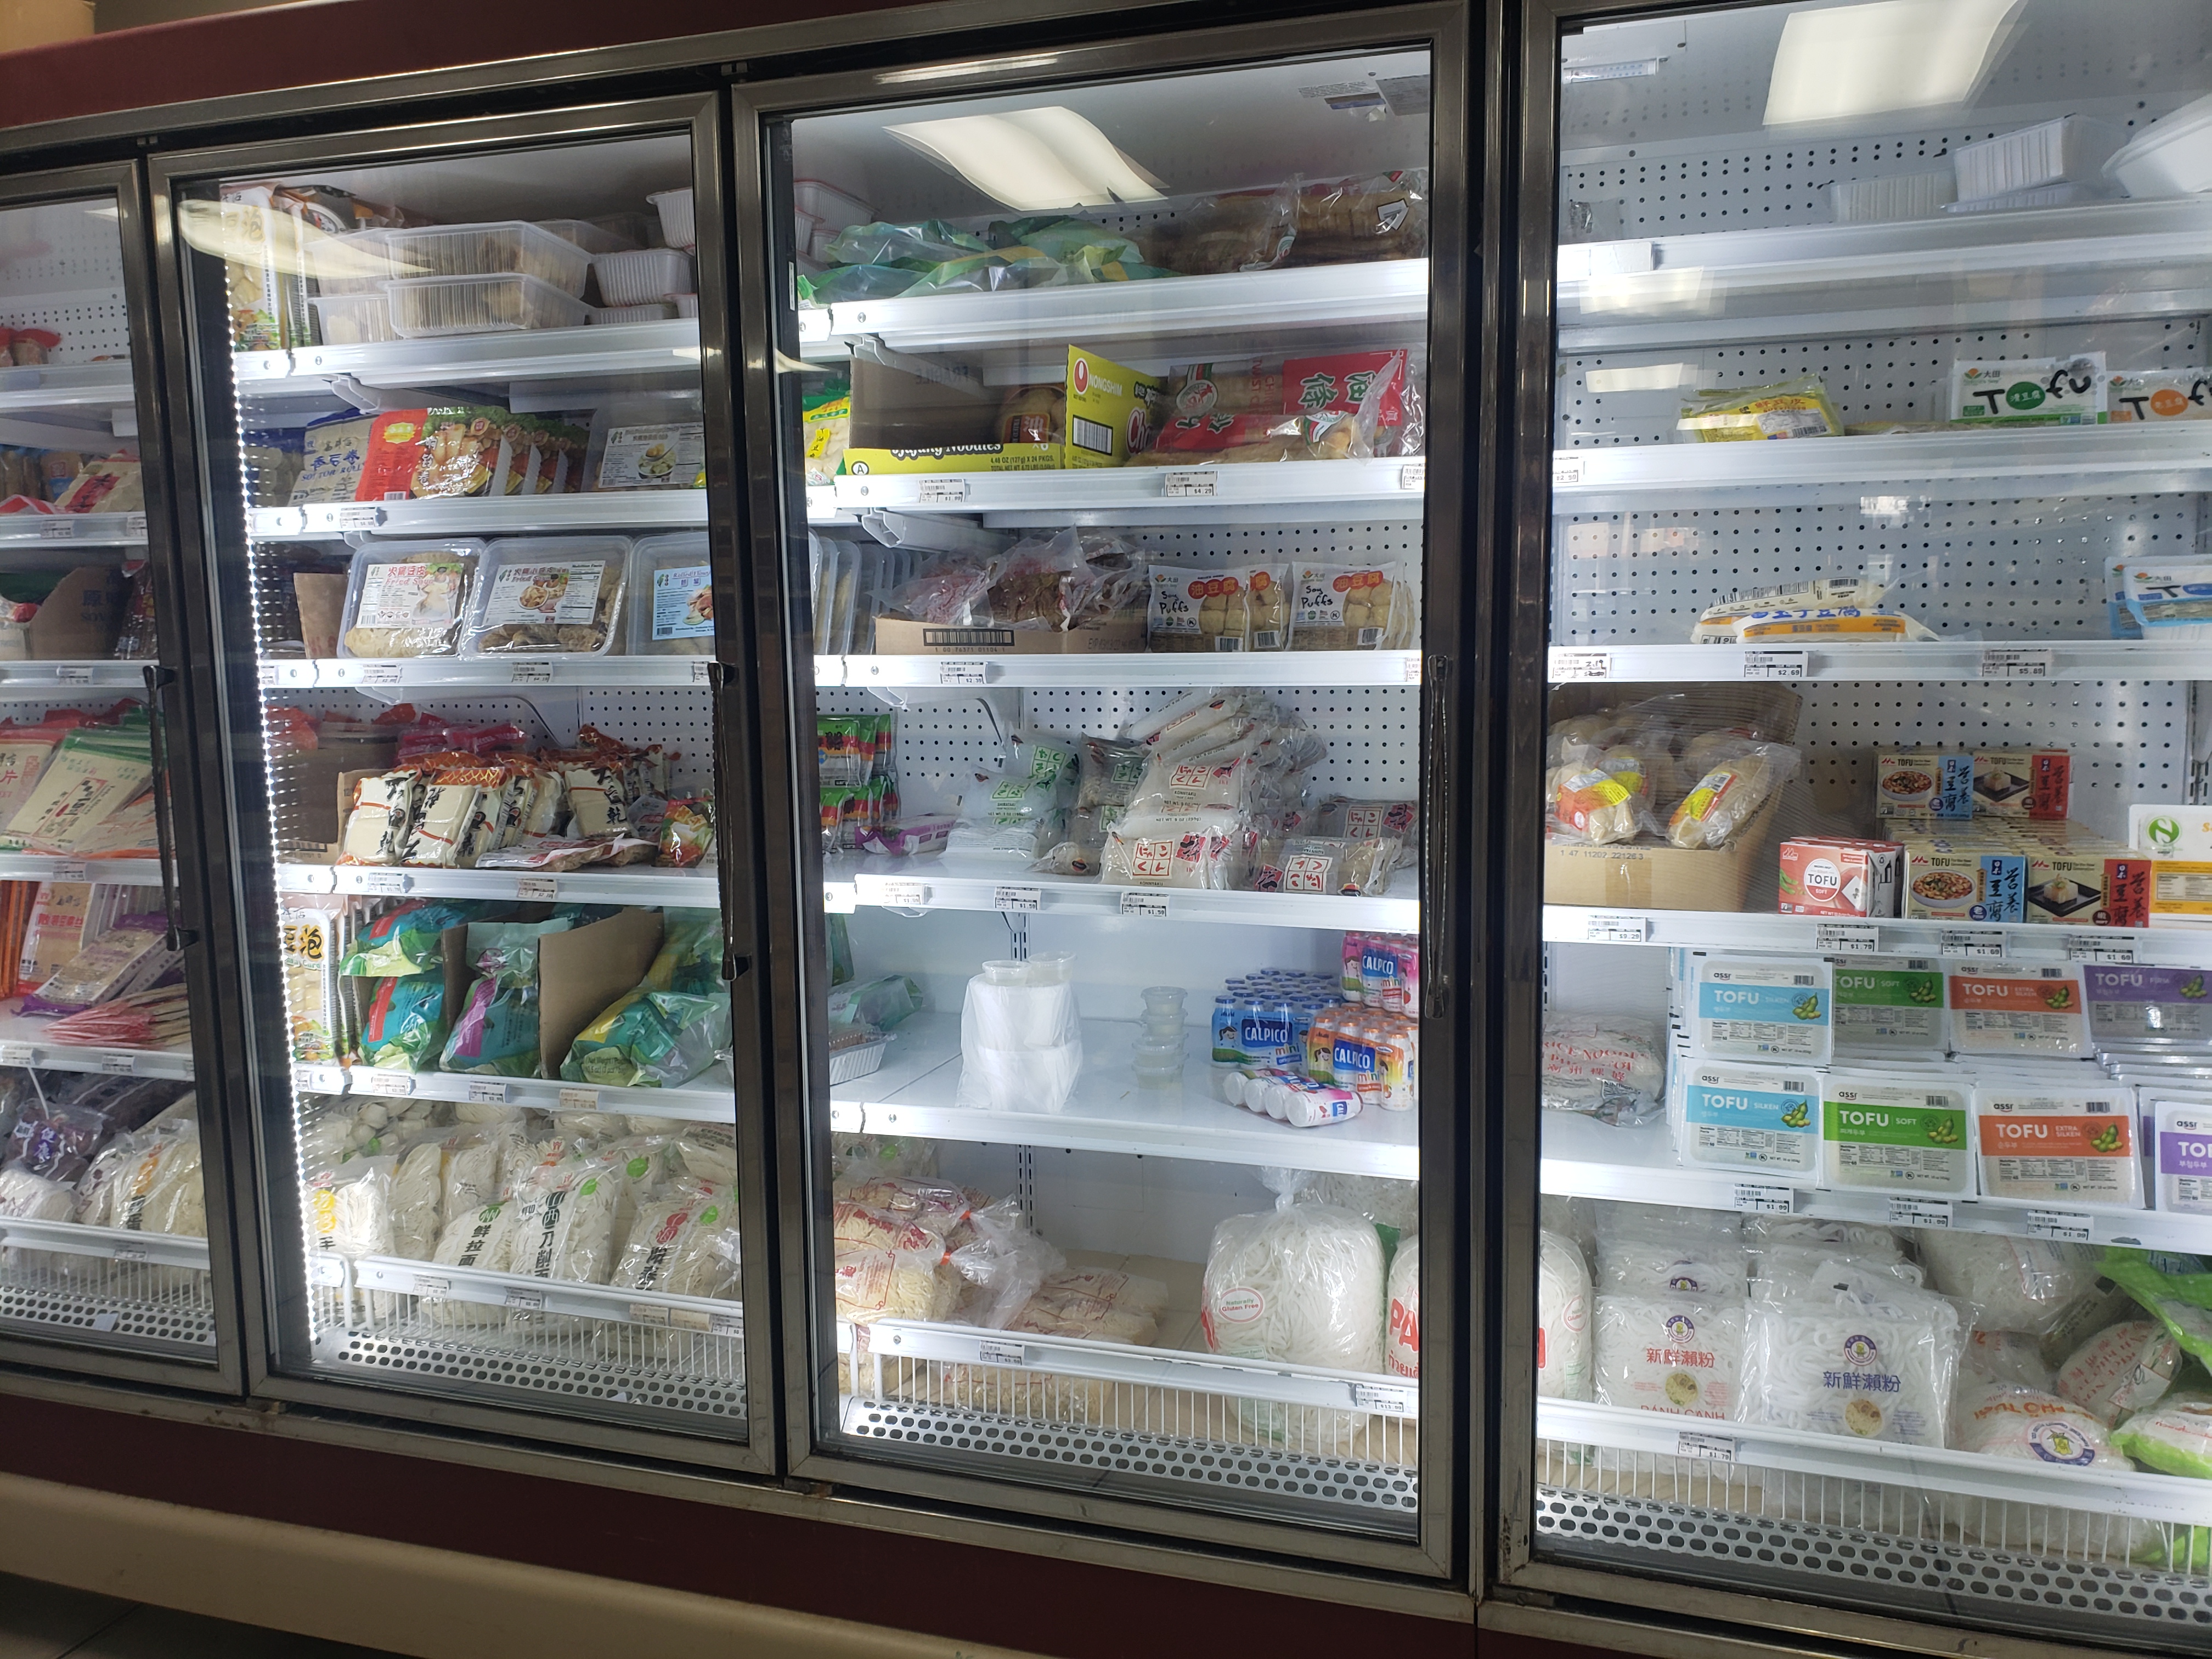 The freezers are mostly full at Asian Supermarket. Photo by Elisabeth Paulus.